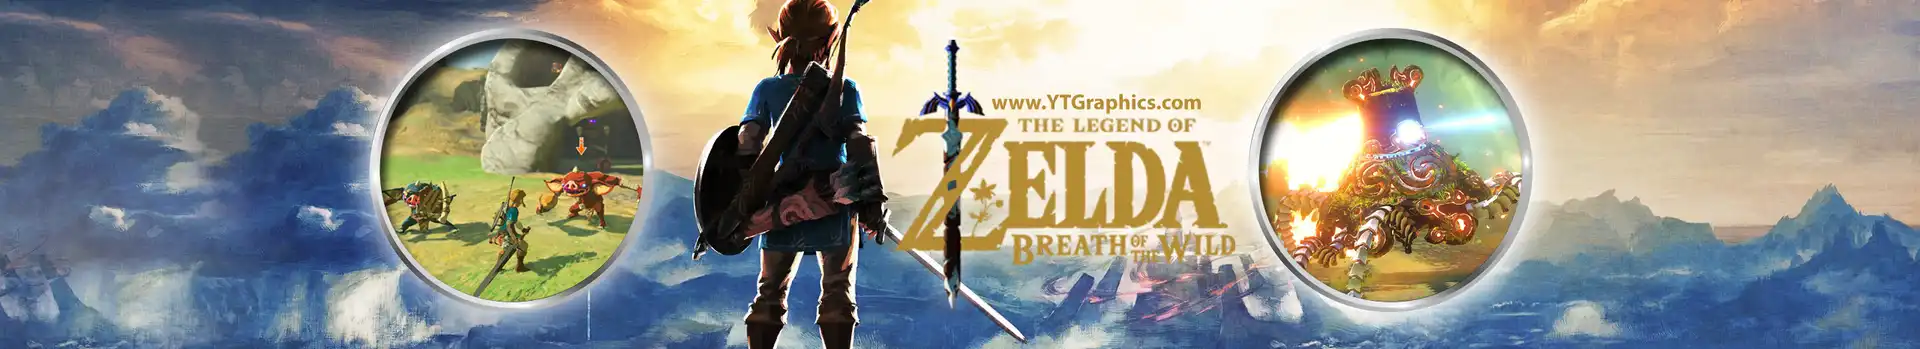 The Legend of Zelda: Breath of the Wild preview